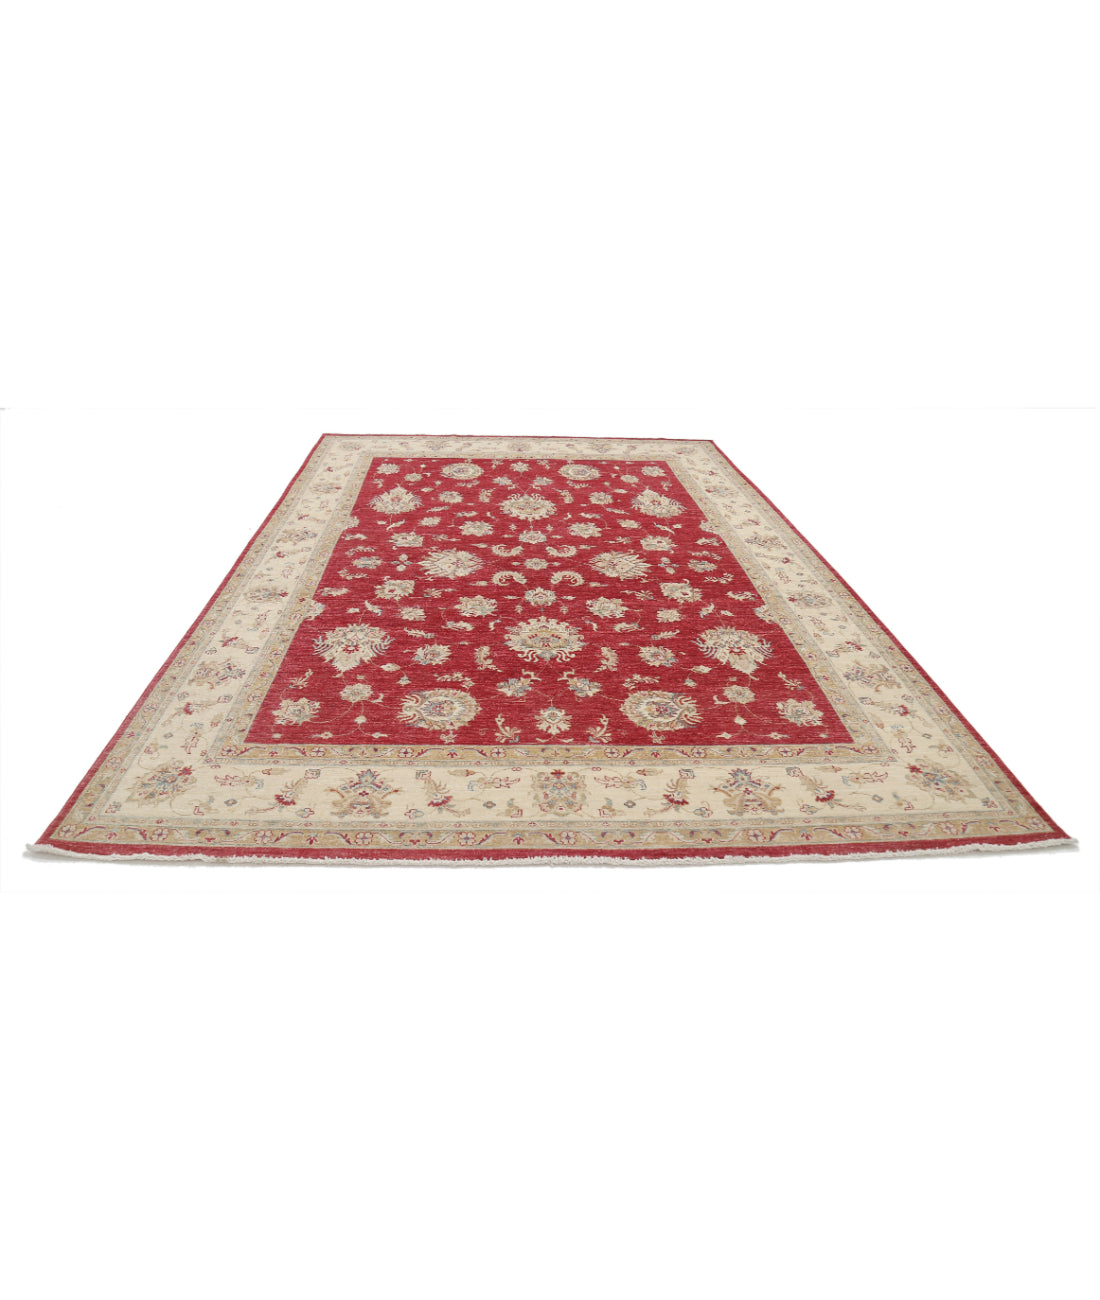 Ziegler 8'3'' X 11'9'' Hand-Knotted Wool Rug 8'3'' x 11'9'' (248 X 353) / Red / Ivory